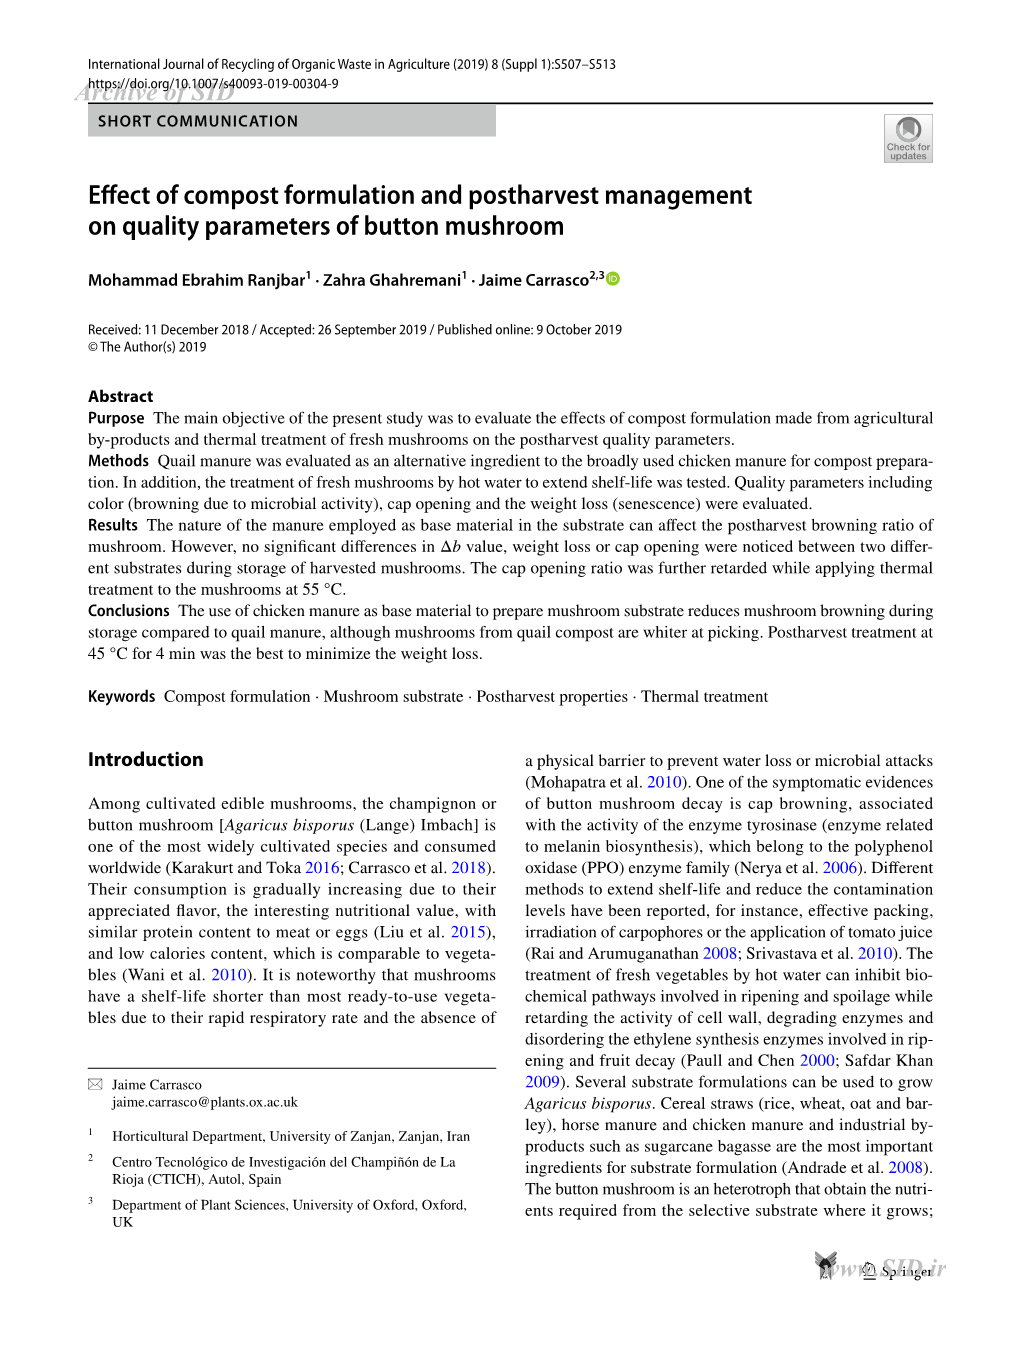 Effect of Compost Formulation and Postharvest Management on Quality